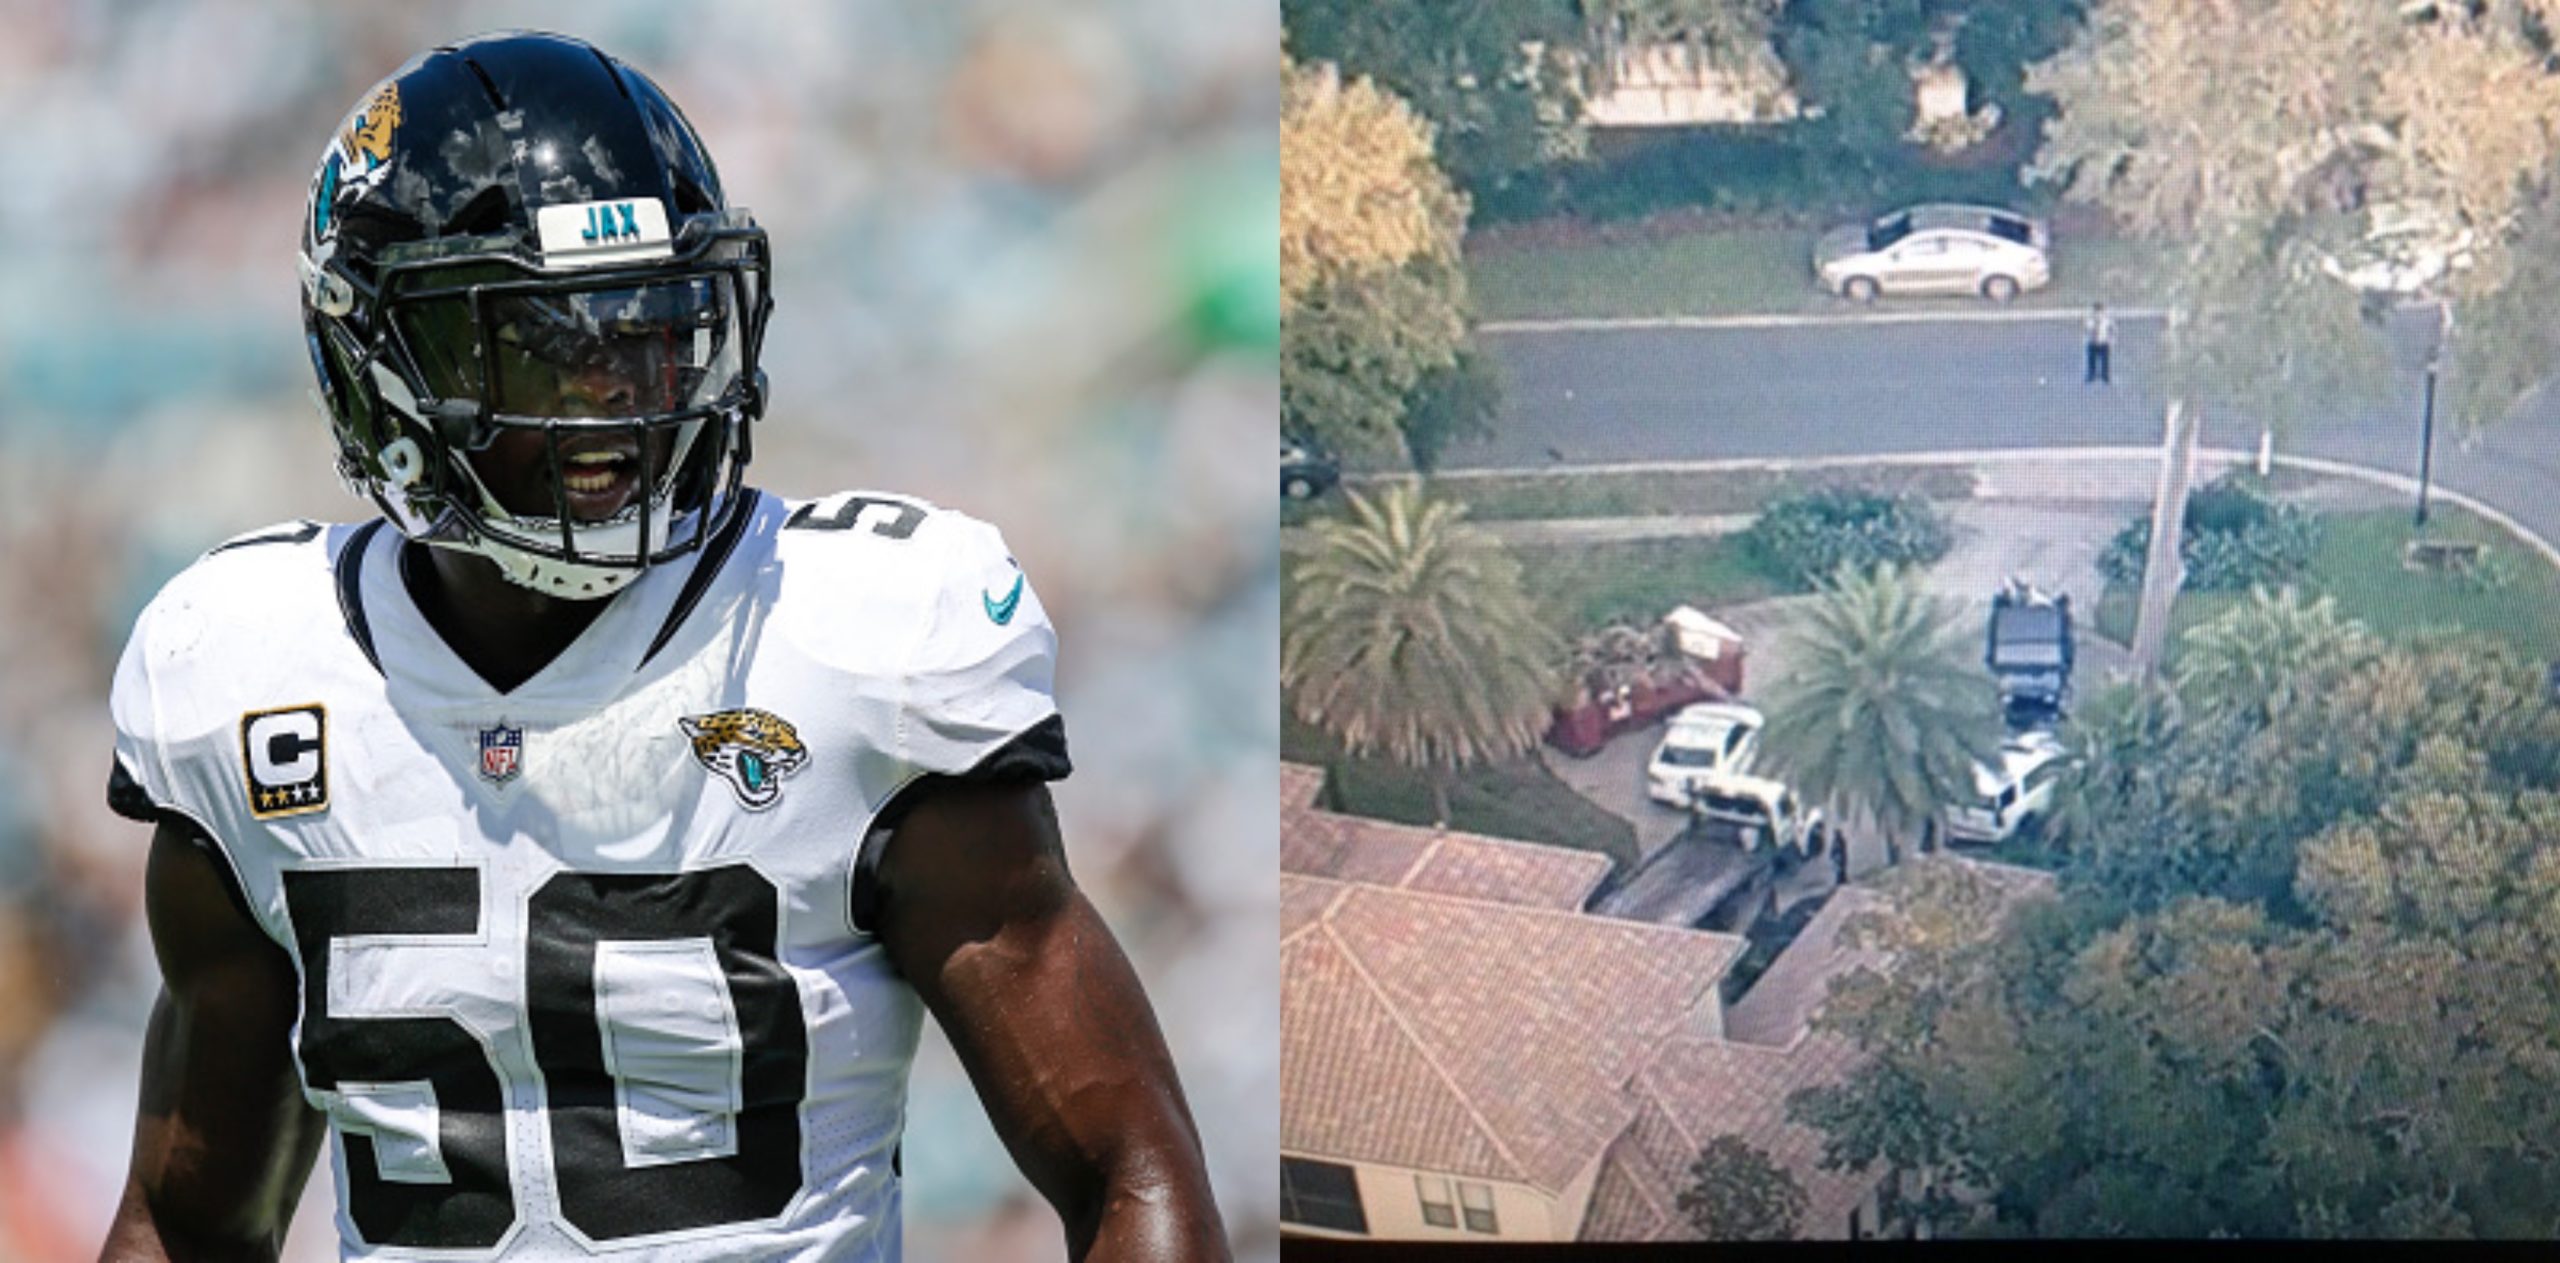 Retired Jaguars Lb Telvin Smith Arrested At Home Following Police Warrant Daily Snark